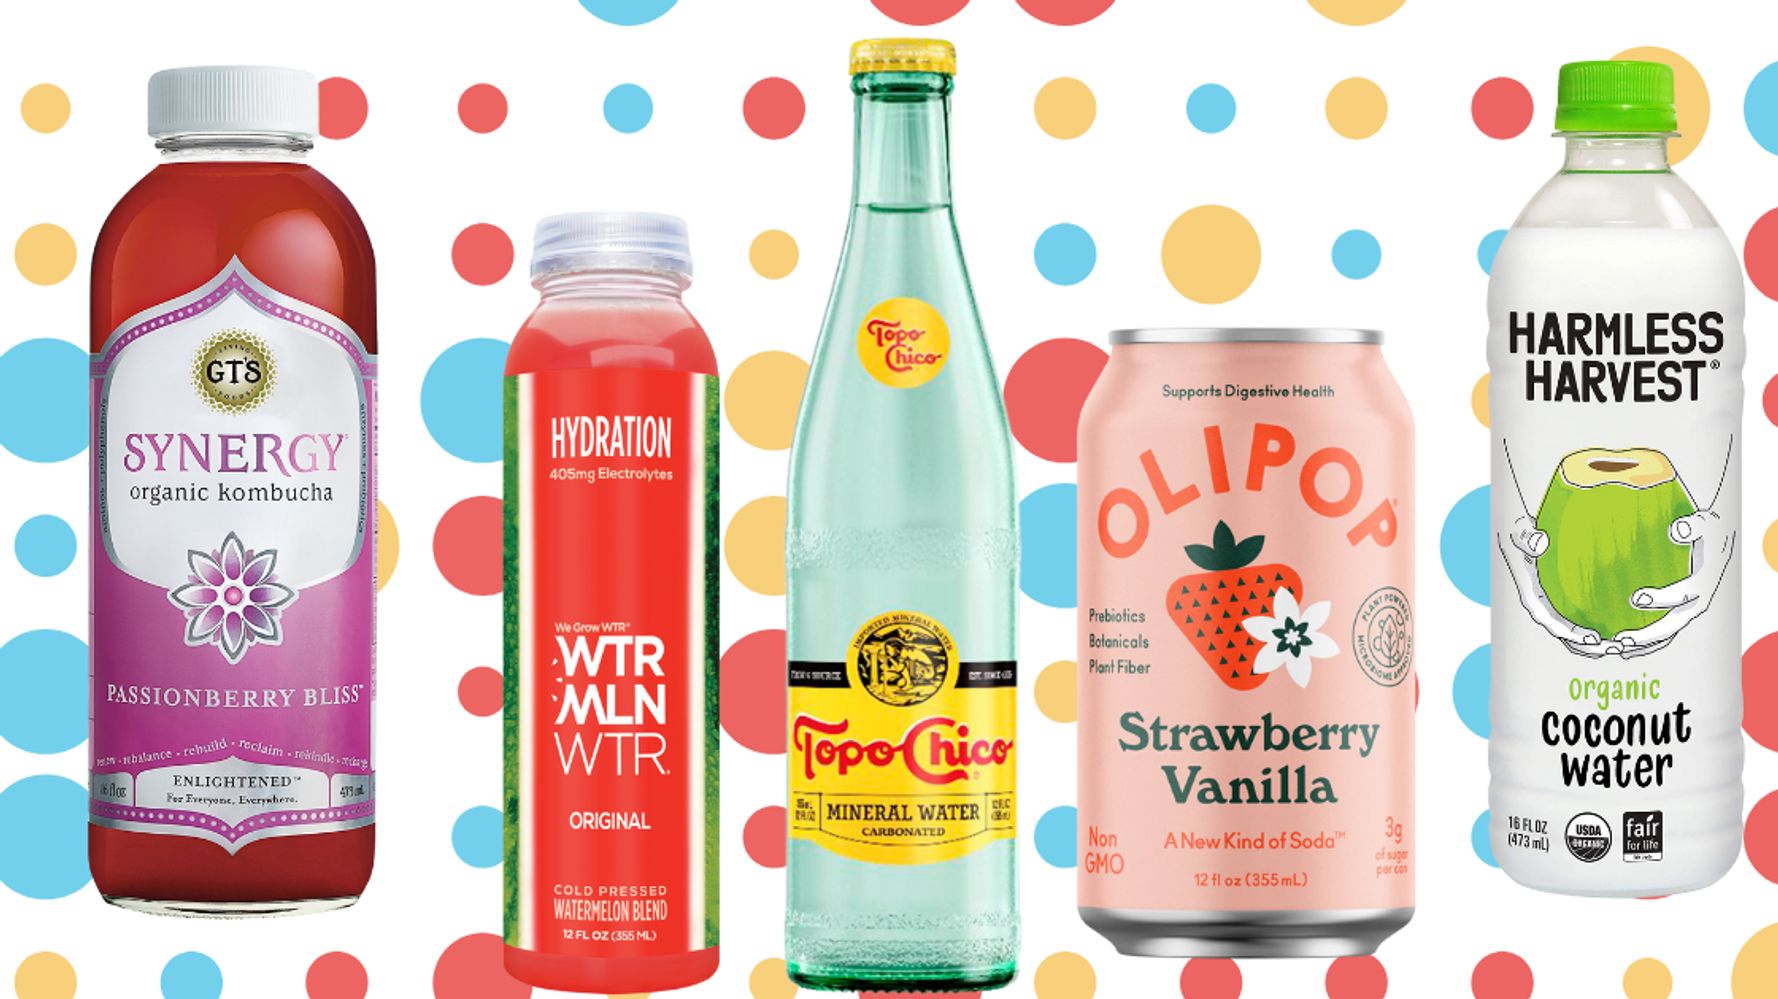 25 Best & Worst Sodas on Grocery Shelves, According to Dietitians